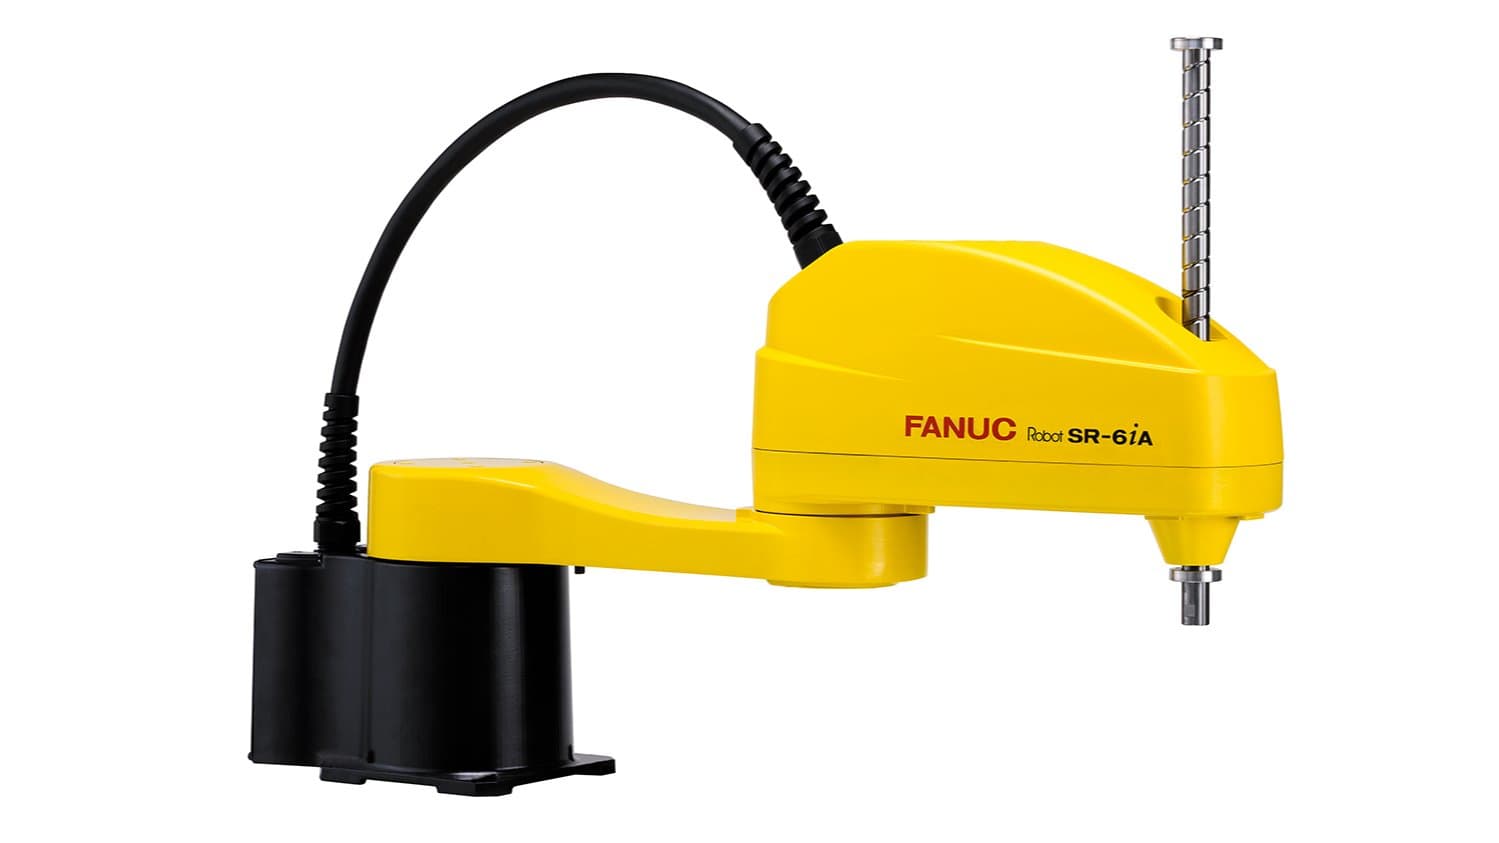 The new FANUC SCARA robot with 6 kg payload